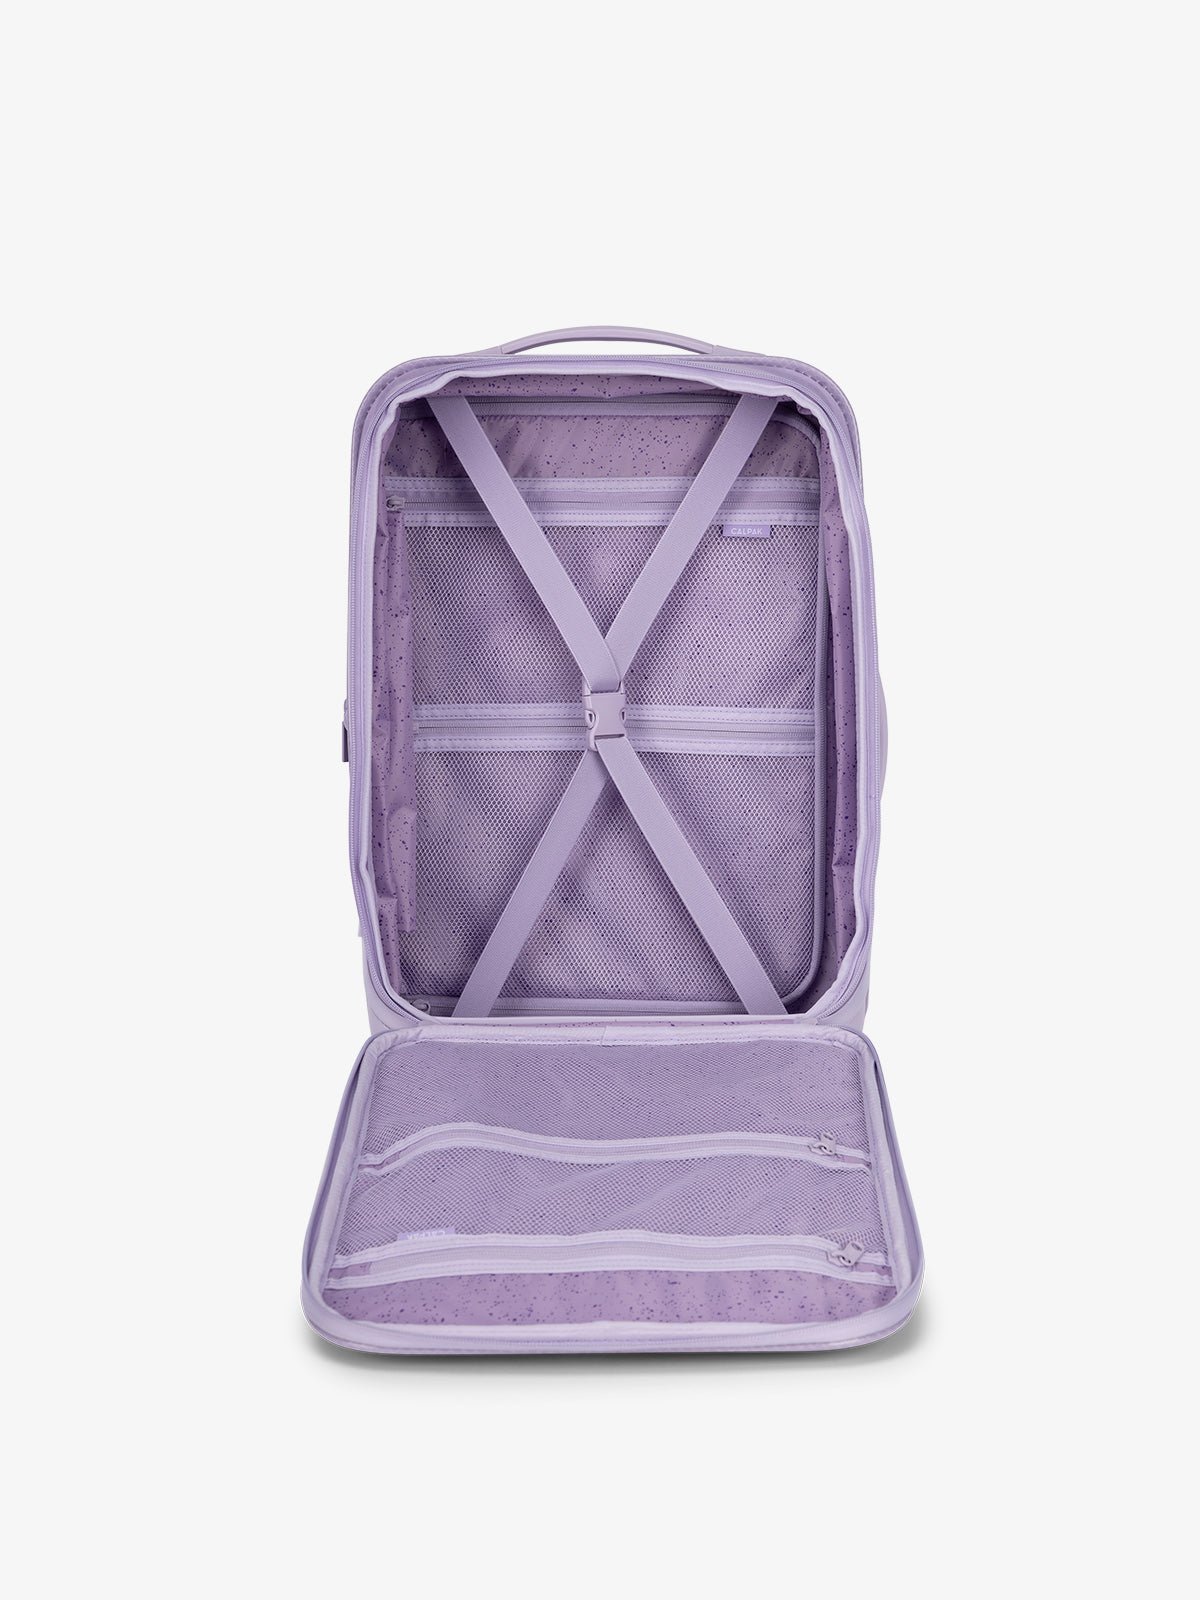 CALPAK Terra Carry-On Luggage interior with multiple zippered compartments and compression strap in amethyst